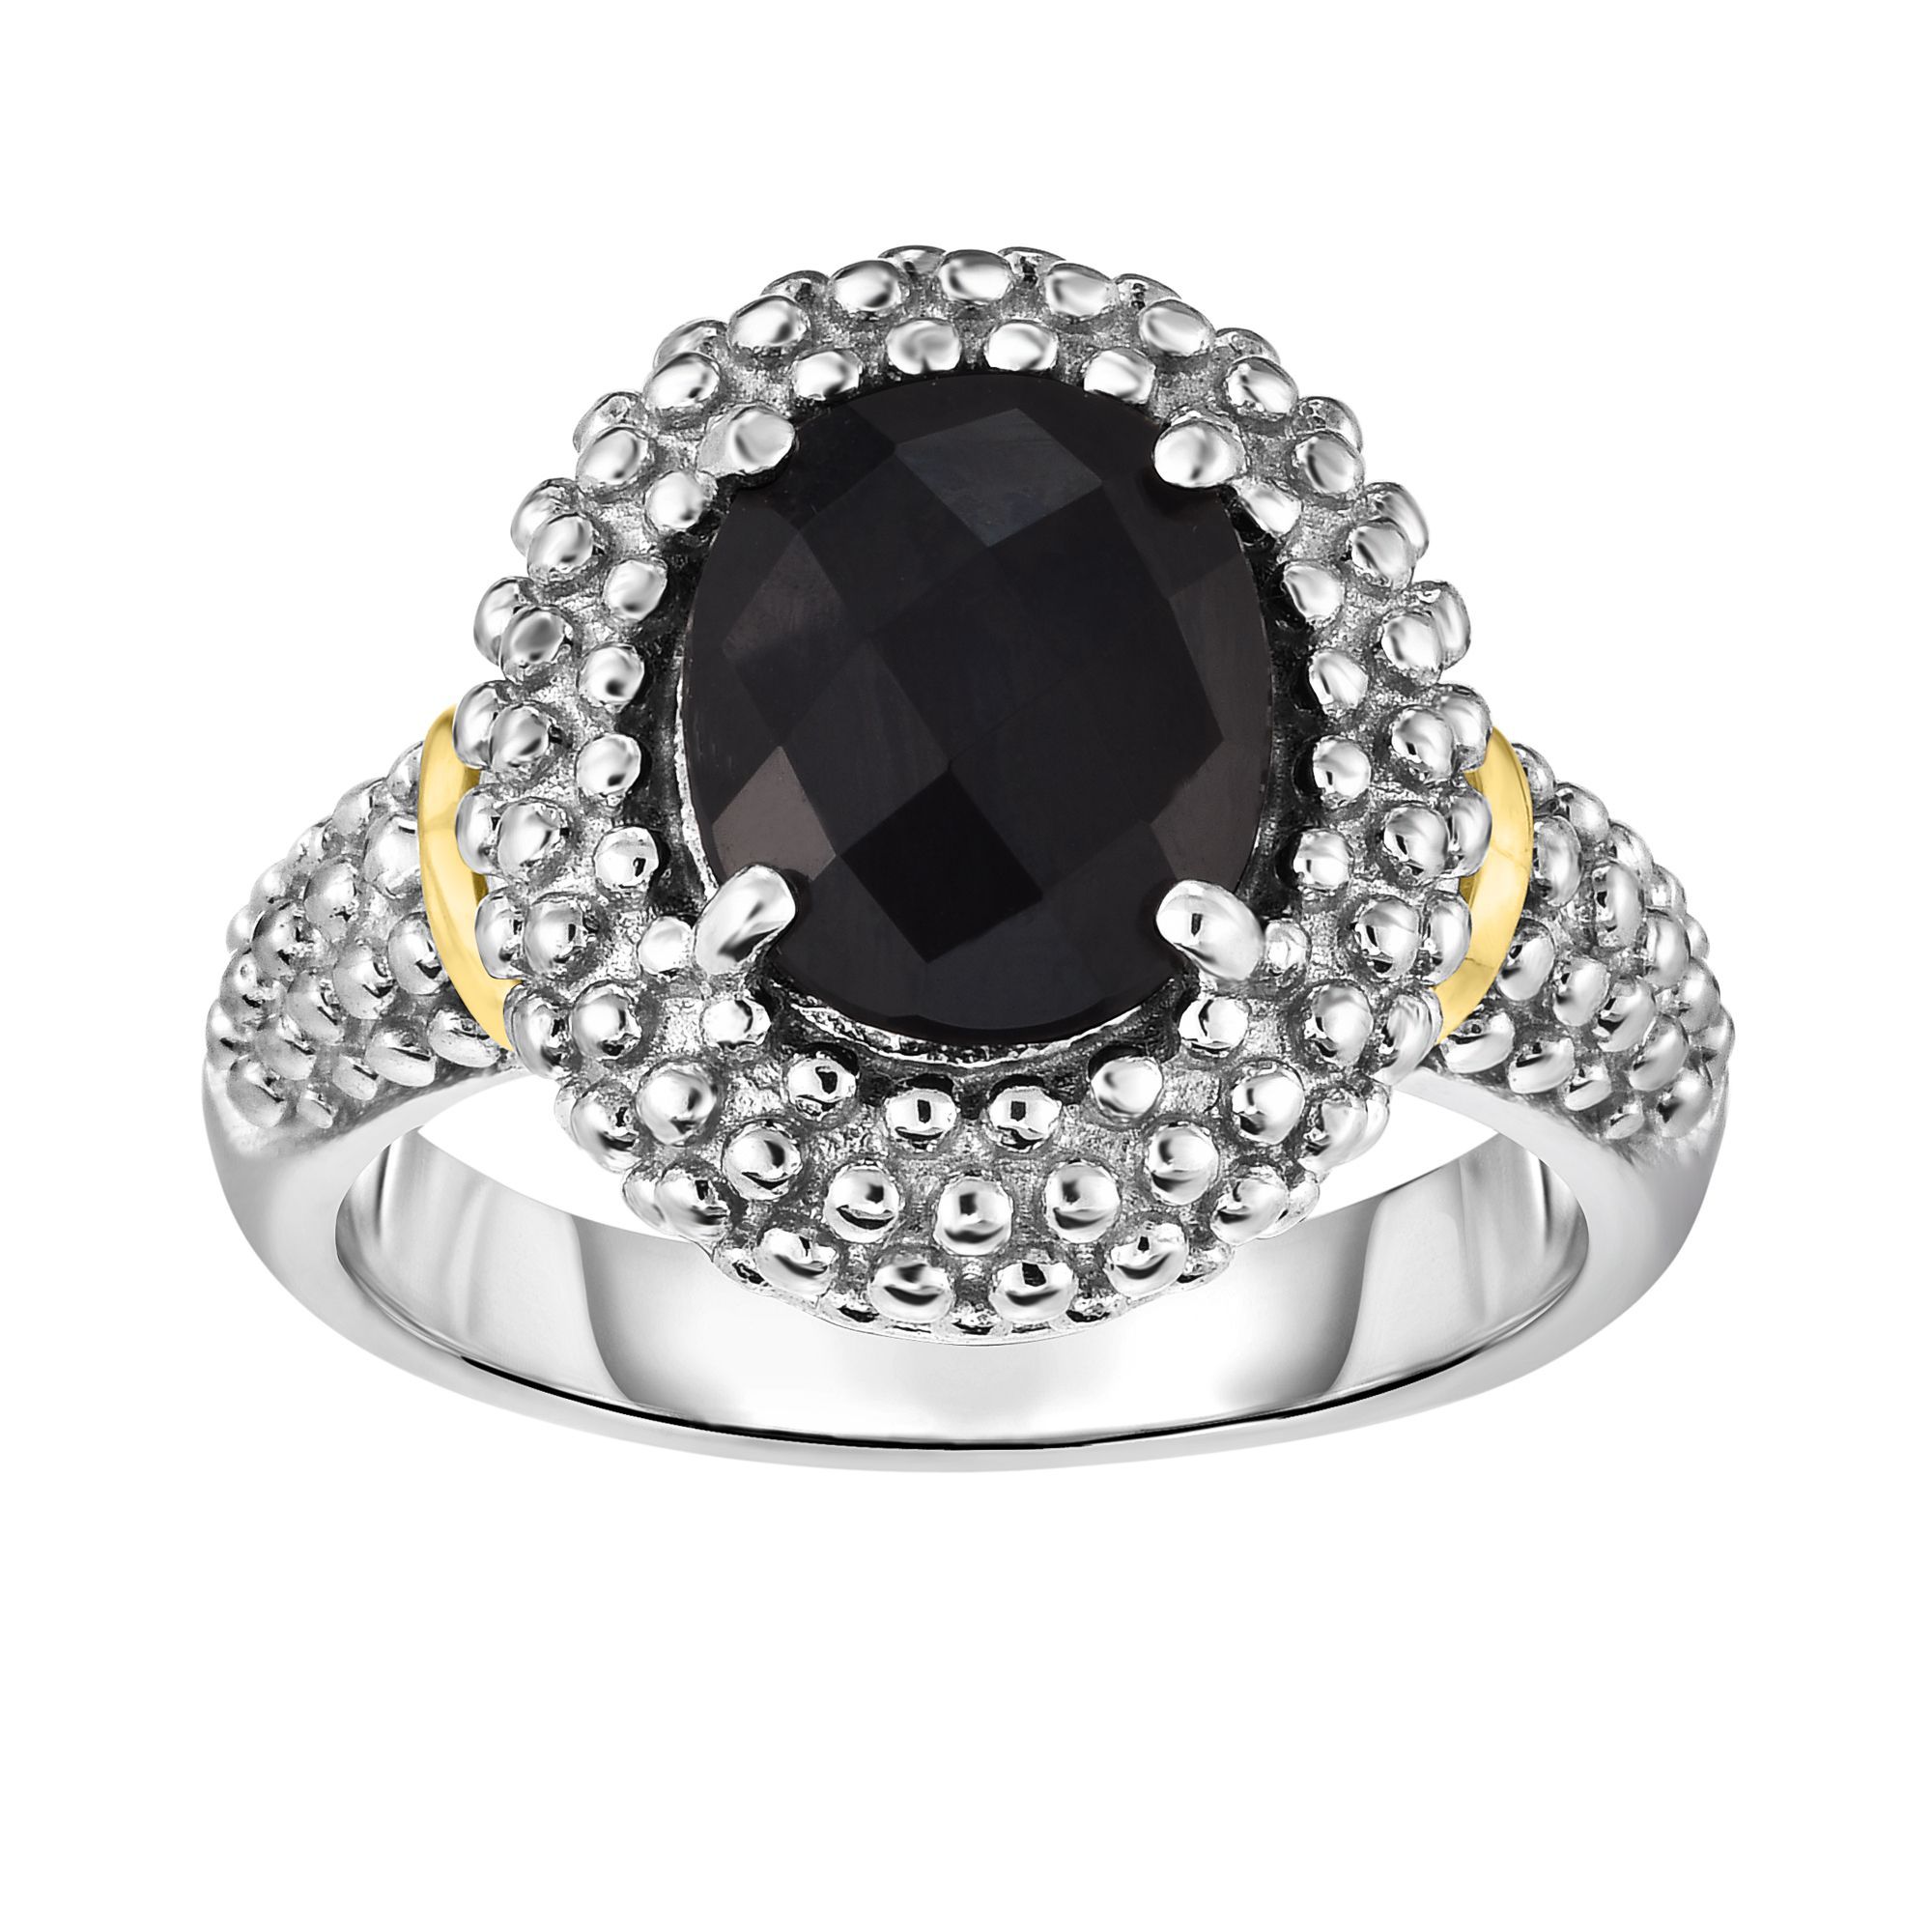 Silver And 18Kt Gold Popcorn Ring With Medium Oval Black Onyx -  BMPG-SILR6388-07